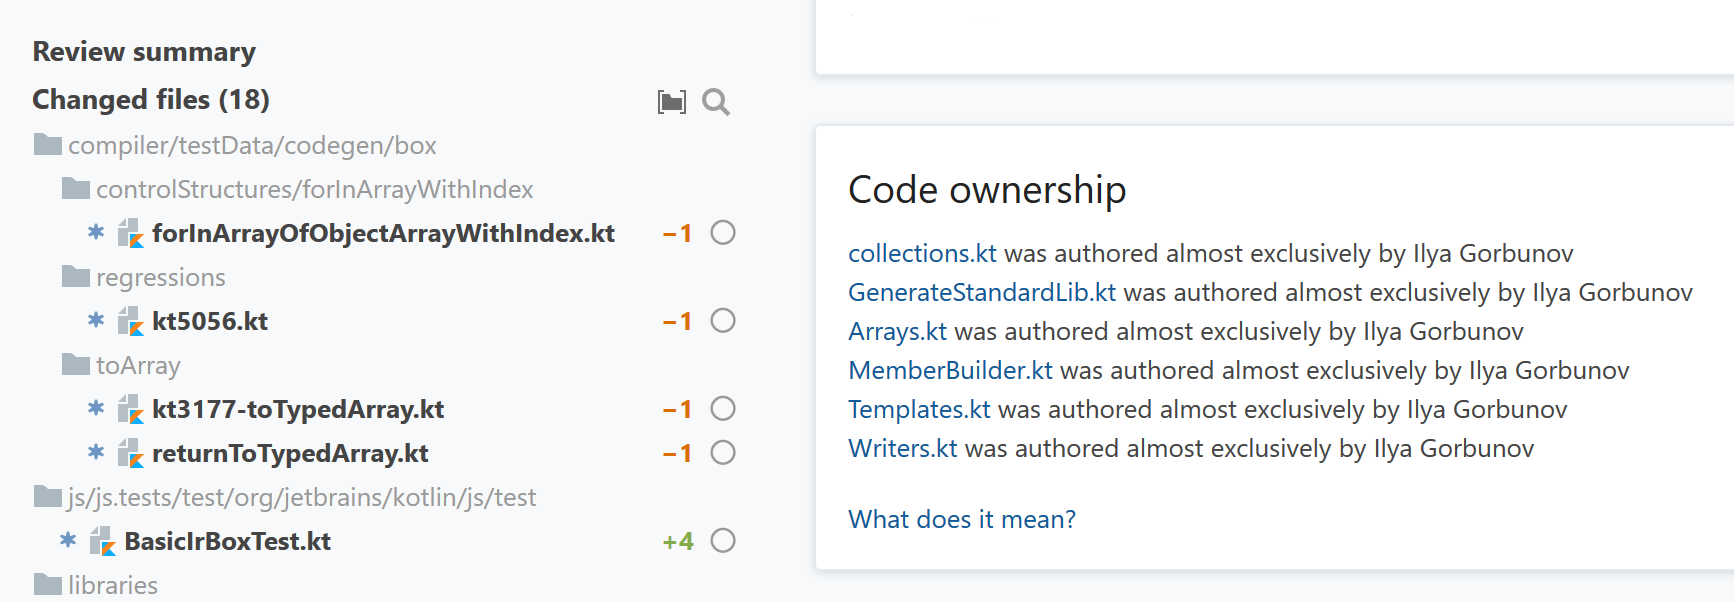 code_ownership.png